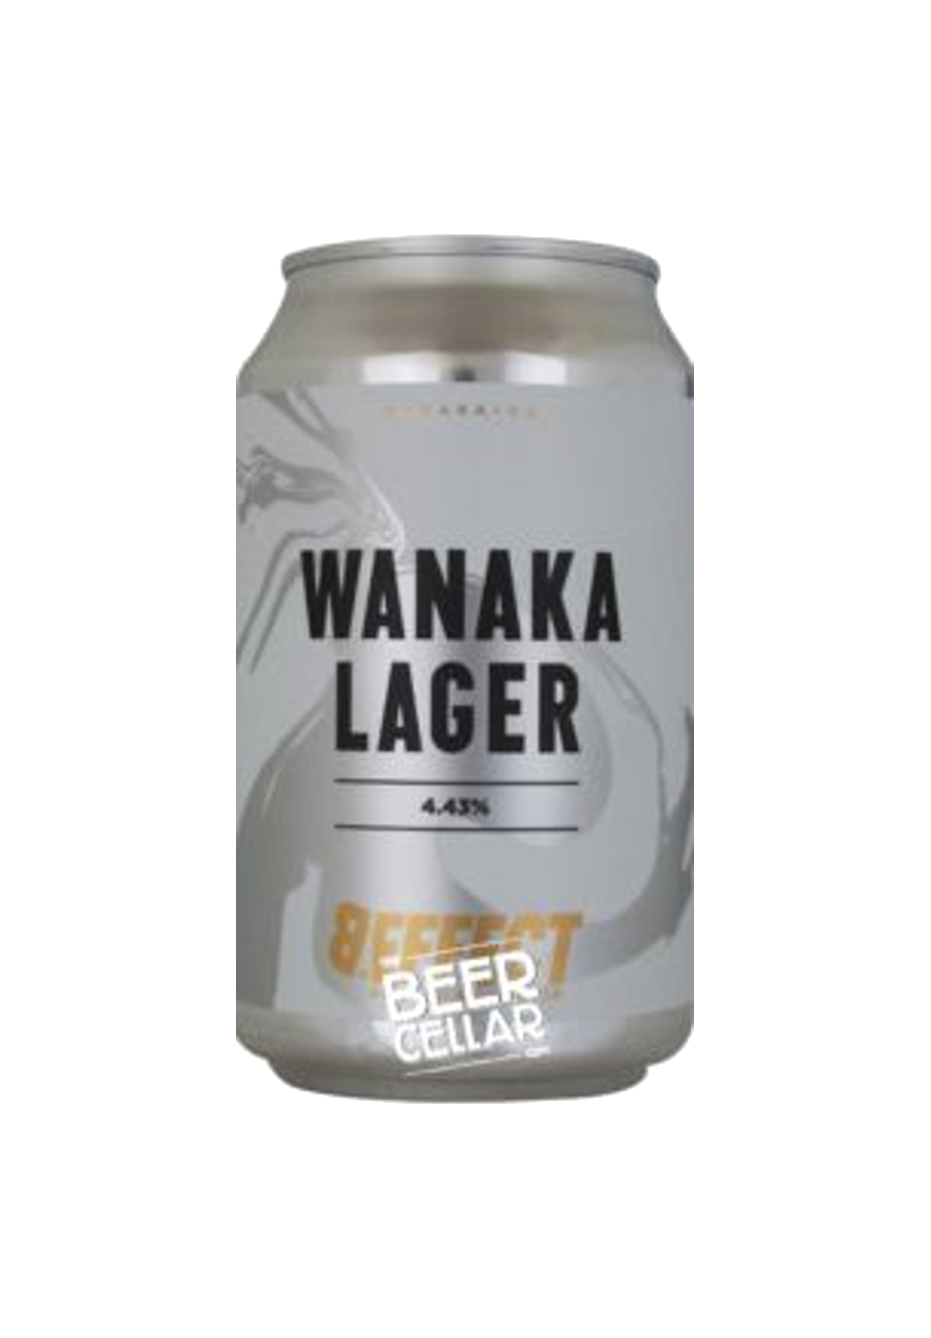 b.effect Wanaka Lager (330ml cans)